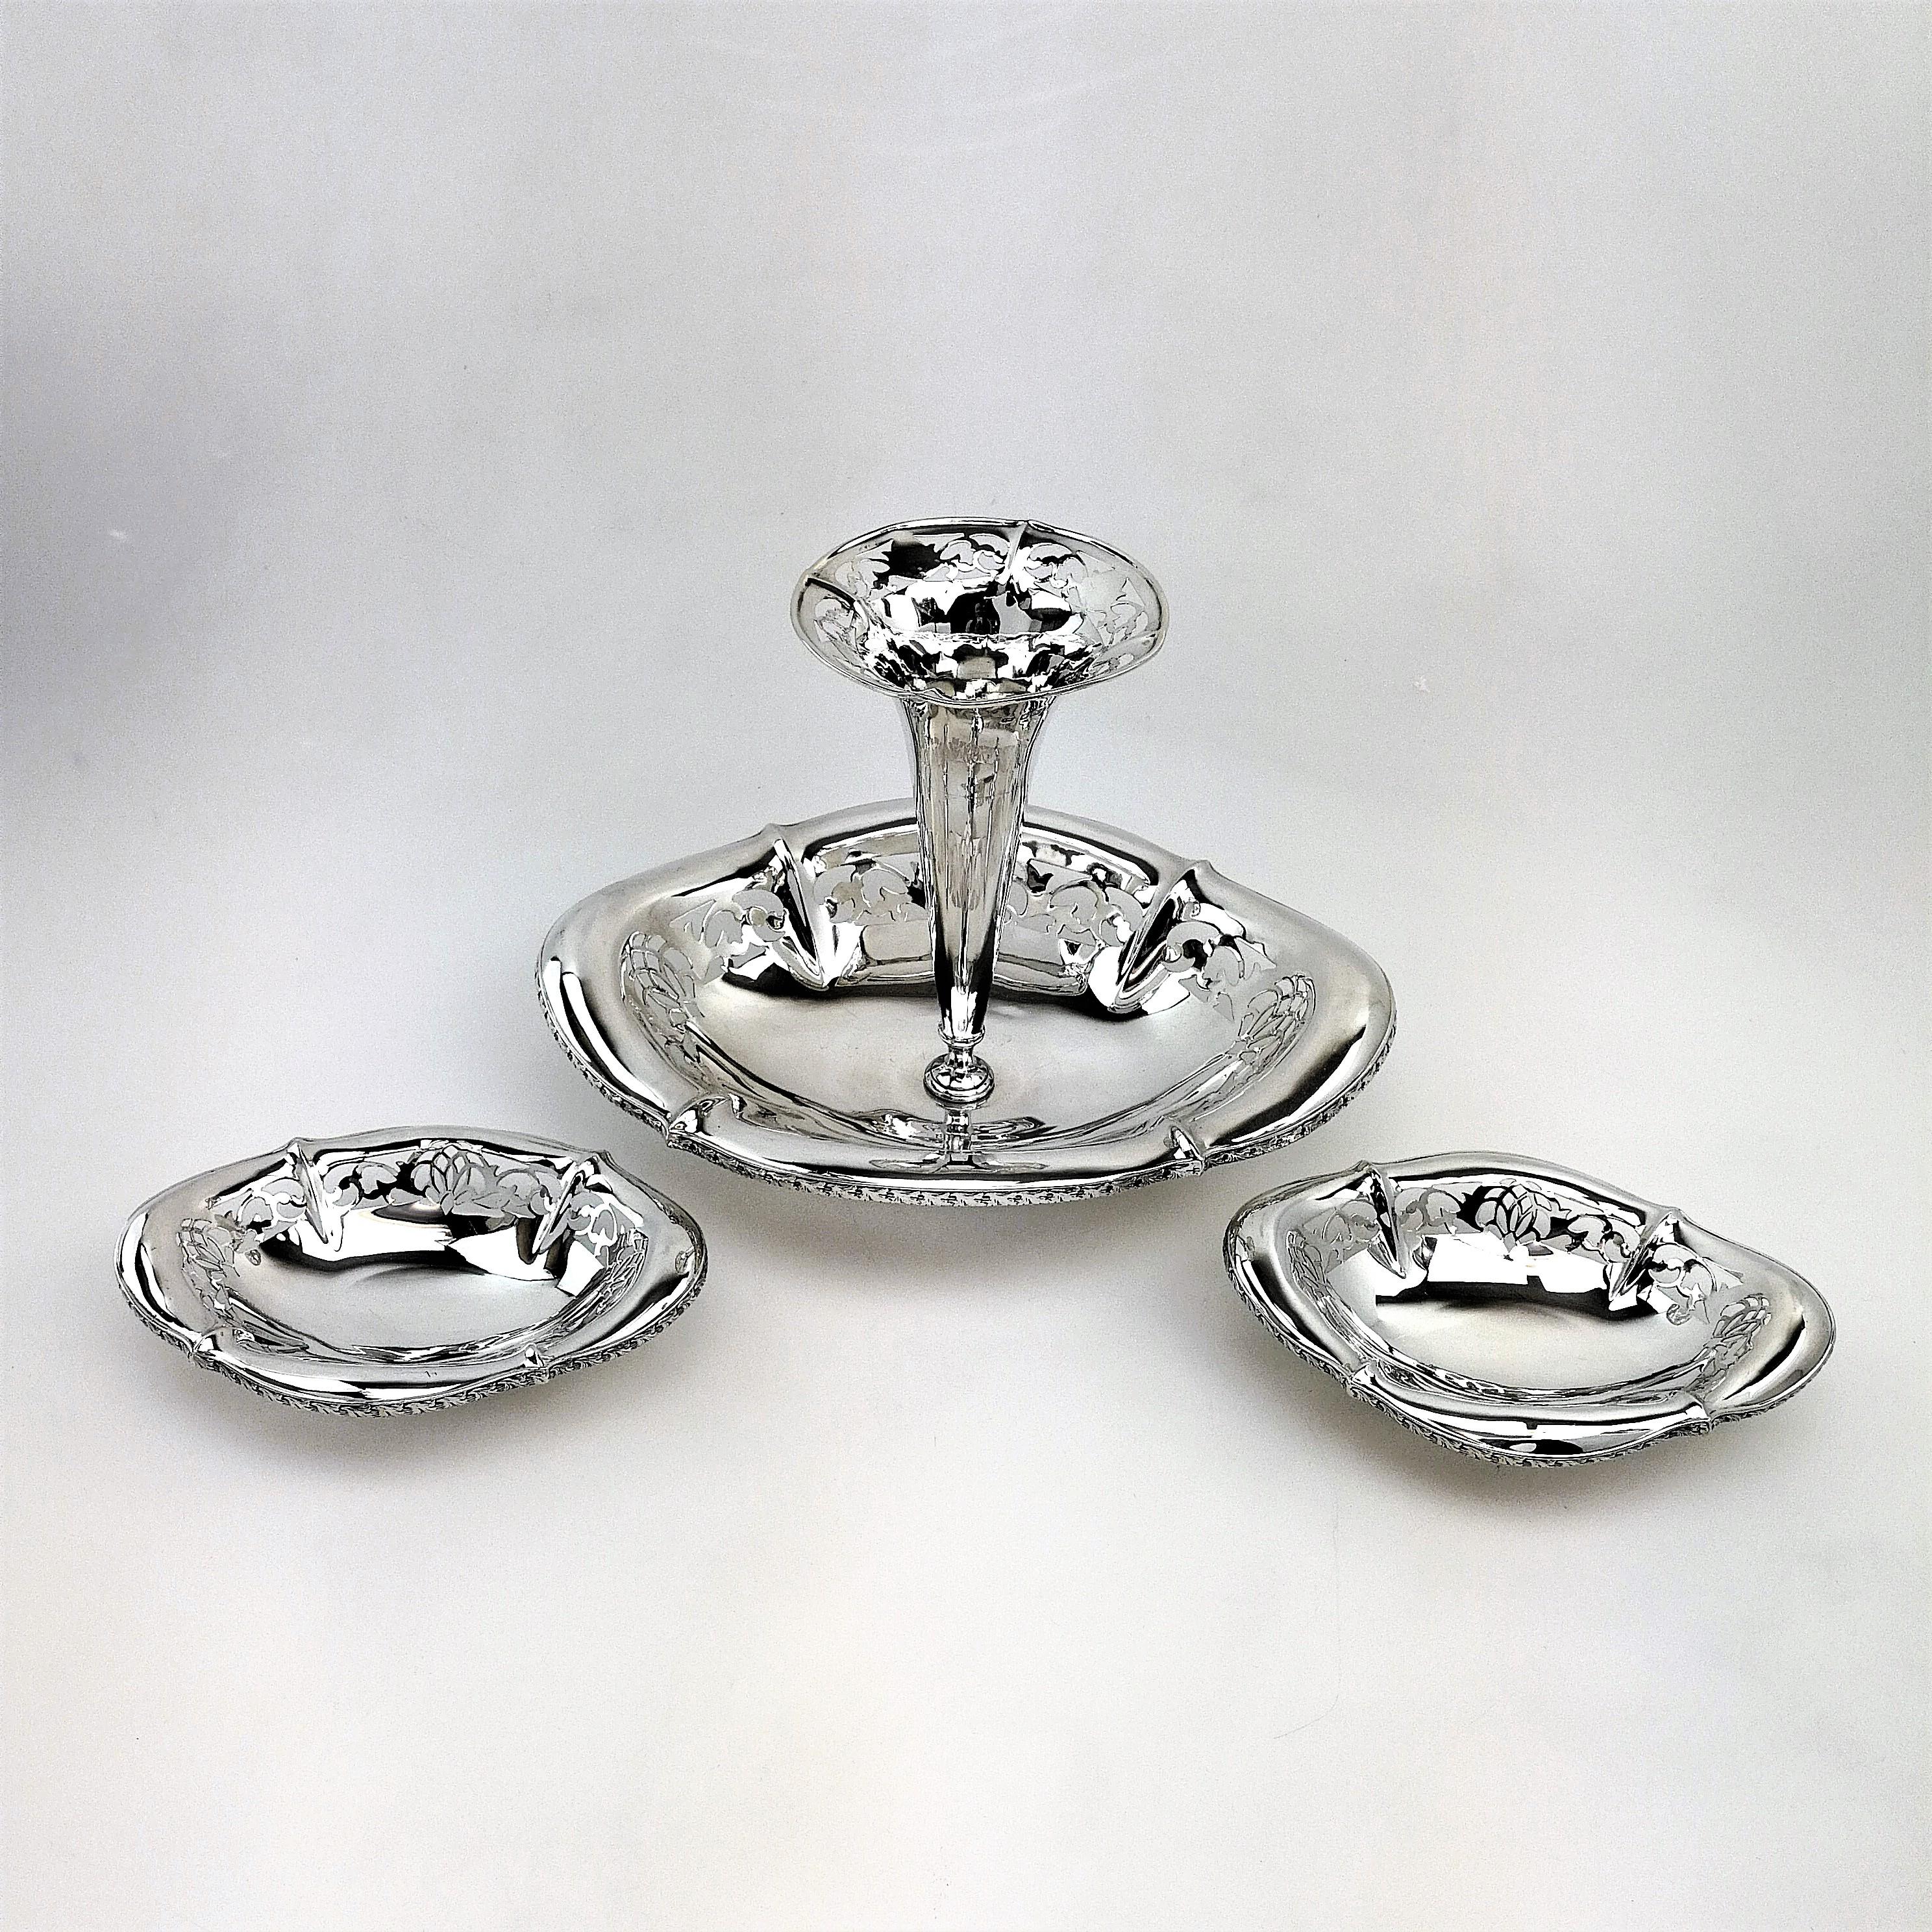 Antique Sterling Silver Epergne / Centrepiece / Vase 1911 In Good Condition For Sale In London, GB